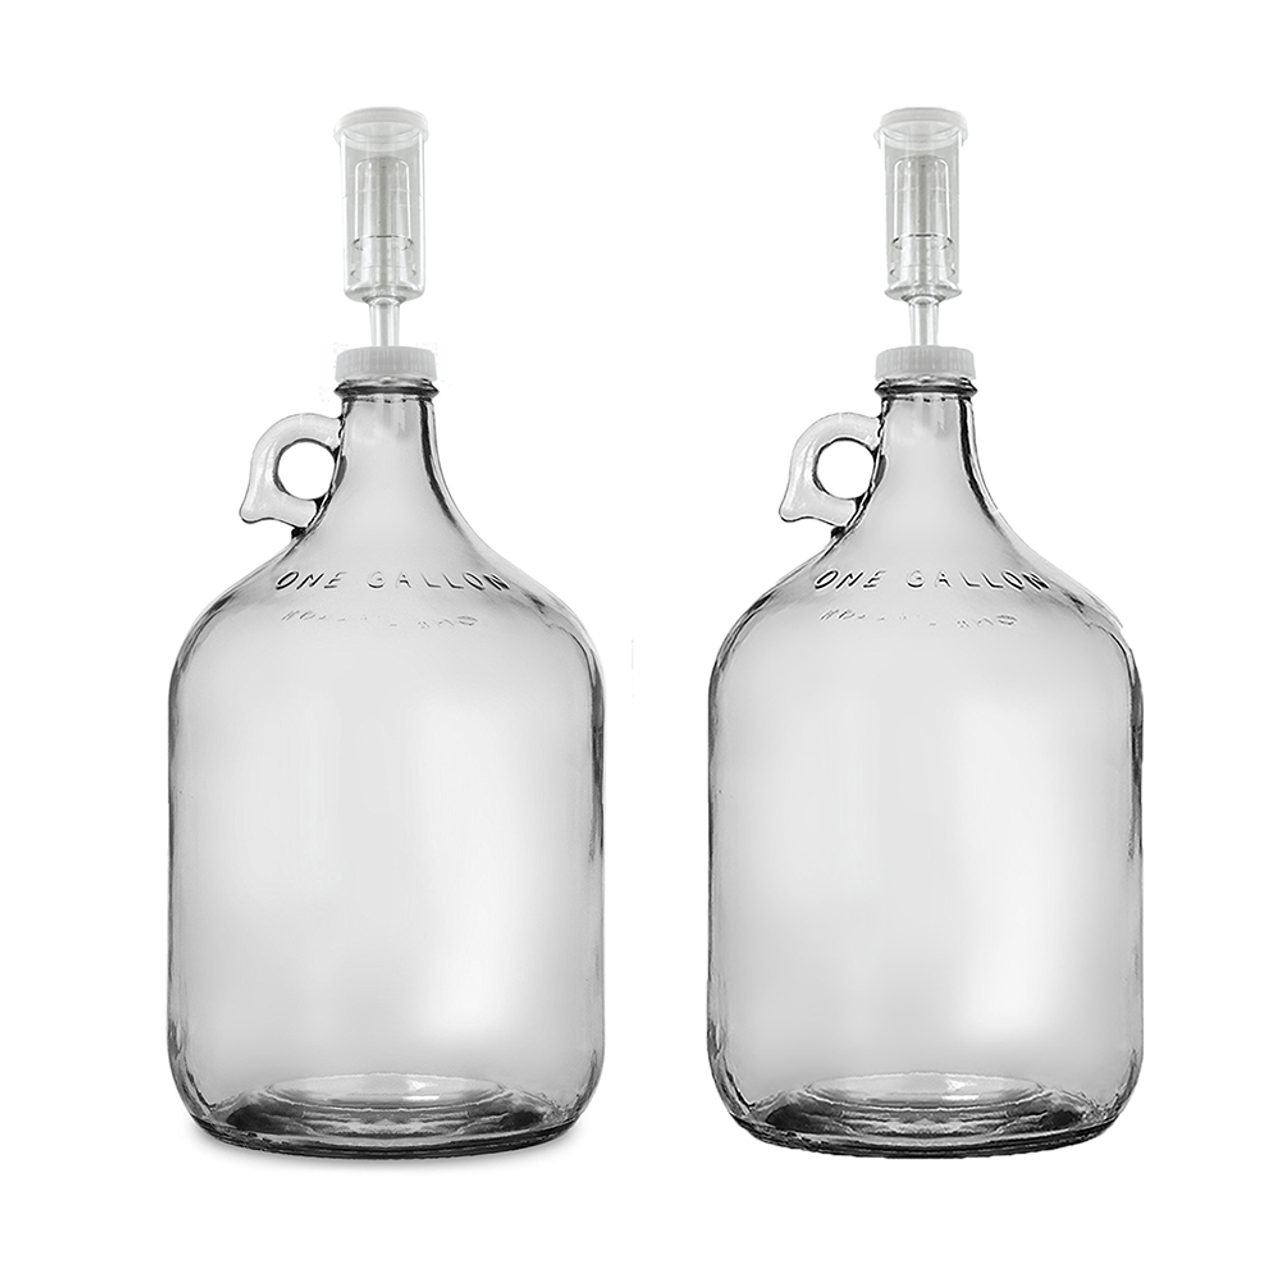 Home Brew Ohio One Gallon Glass Jug with 38mm Cap with Hole and